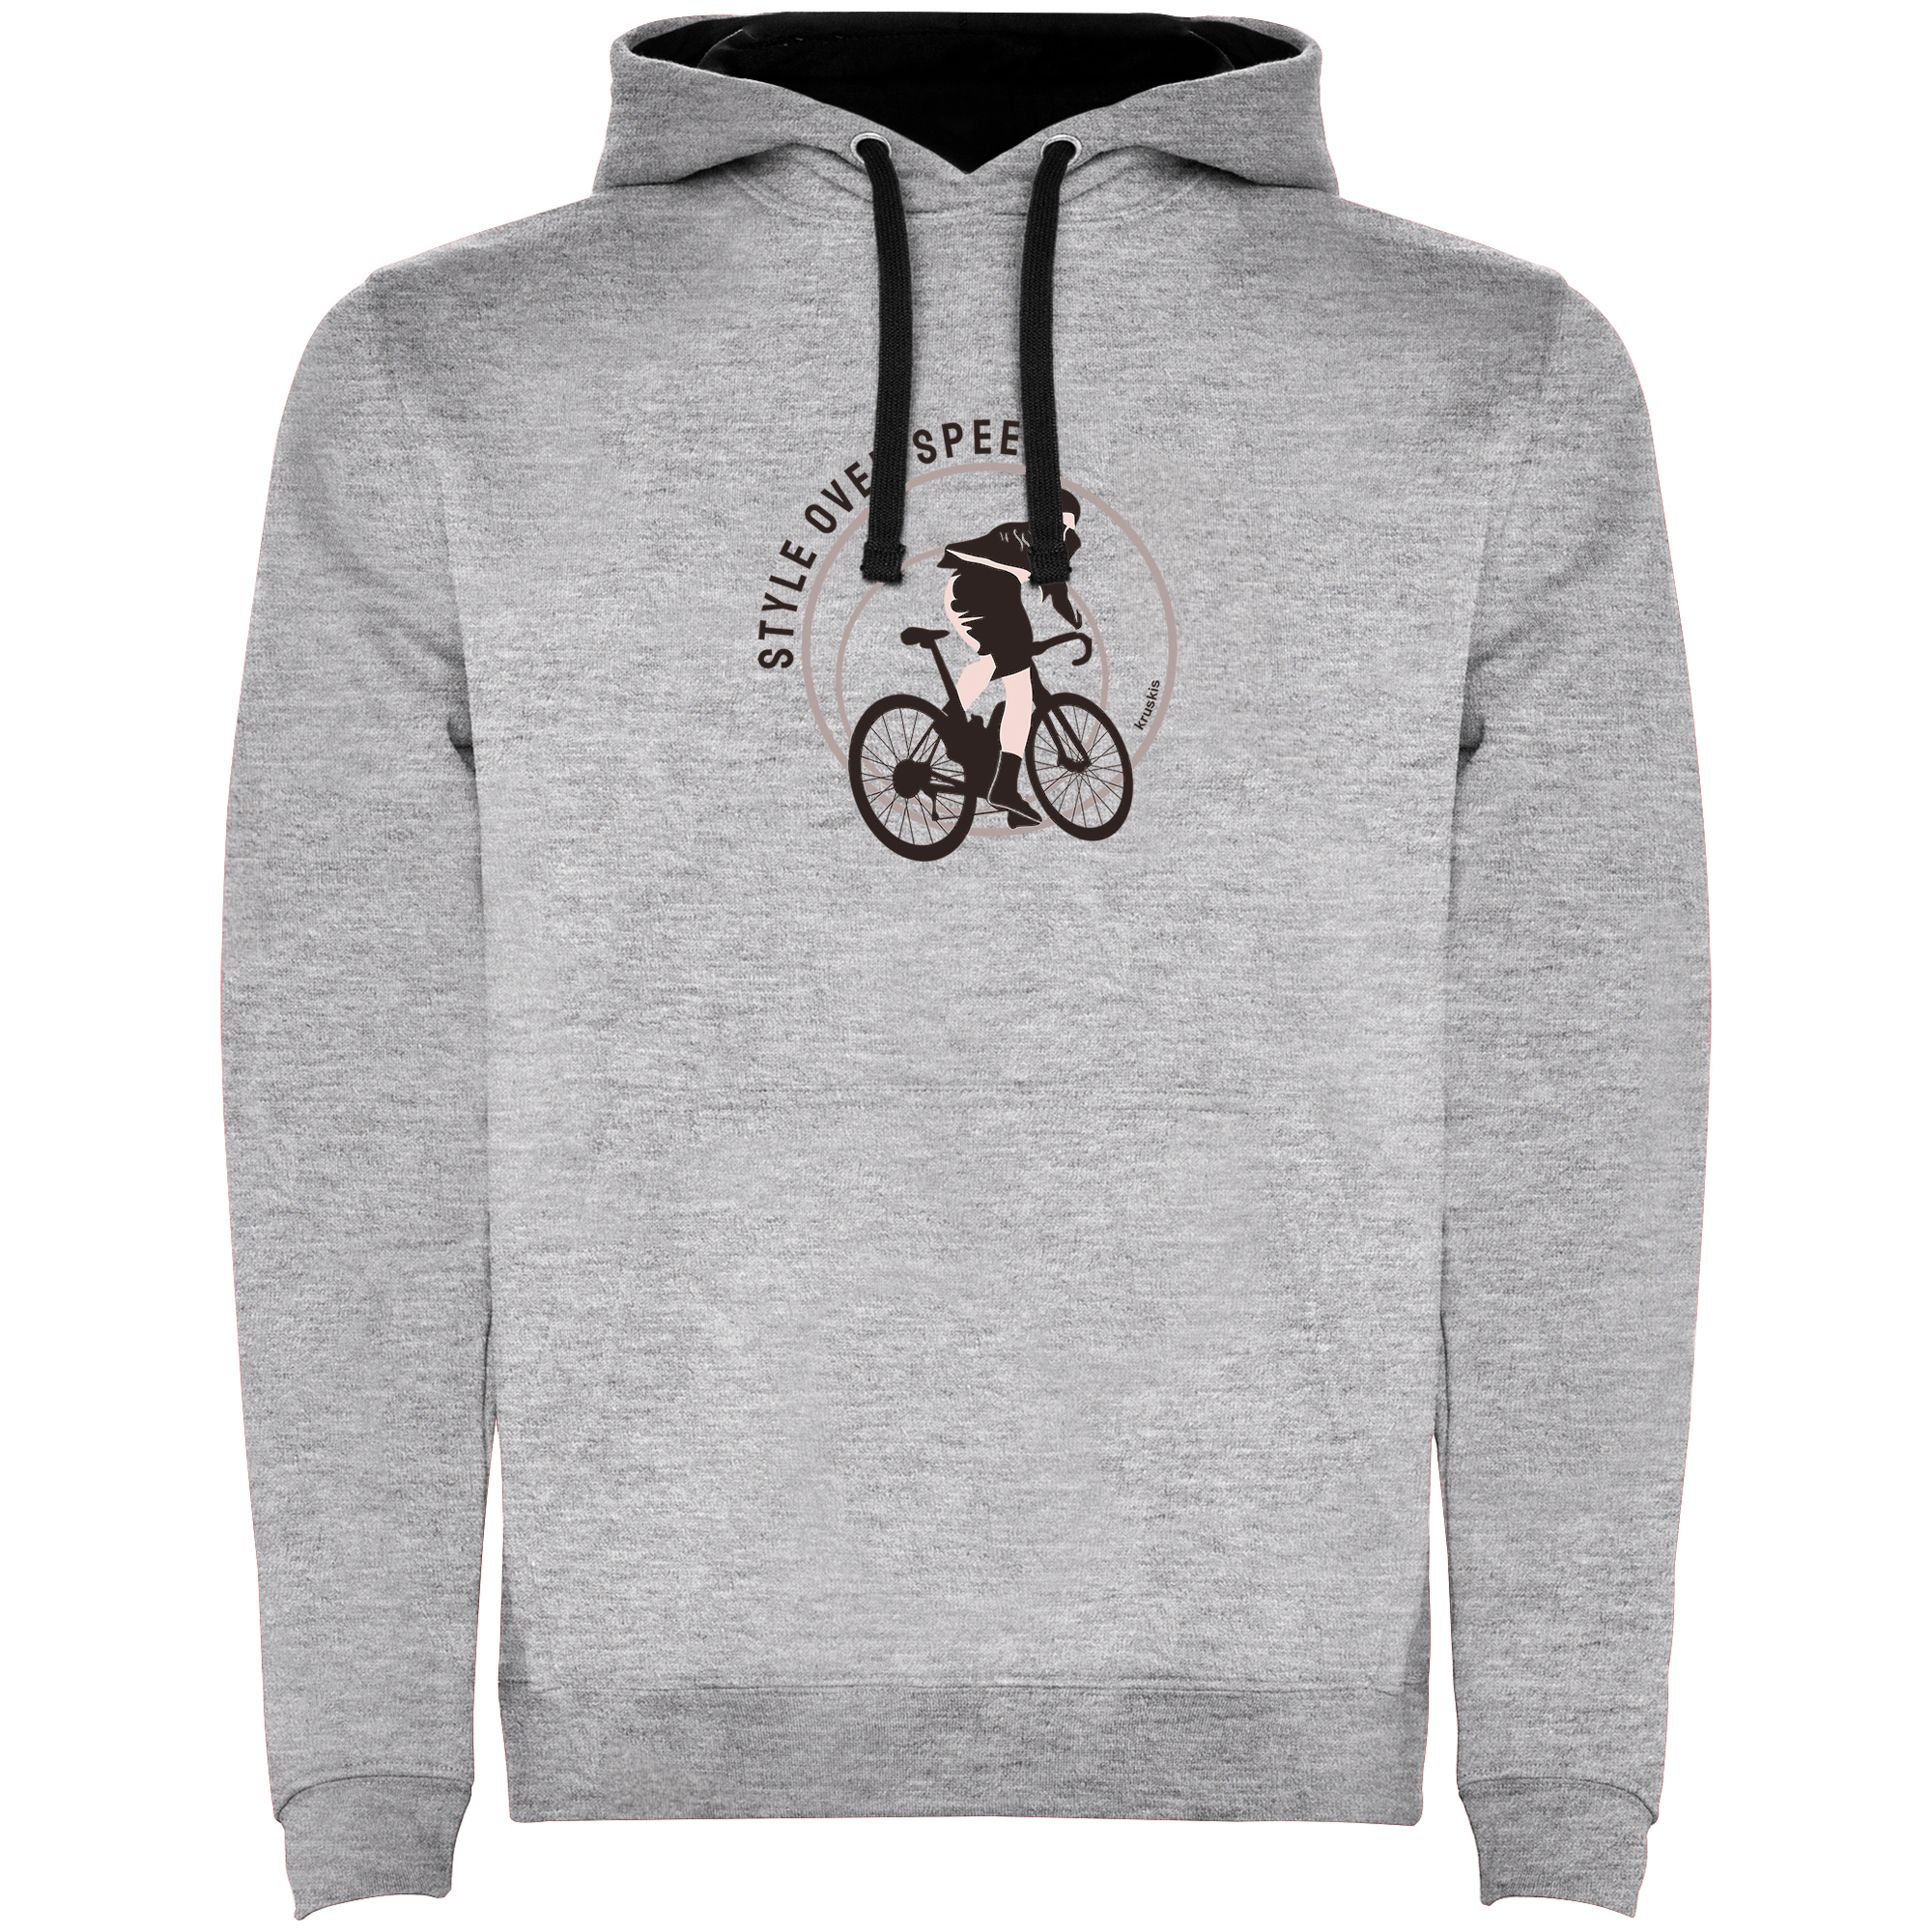 Hoodie Cycling Style Over Speed Unisex